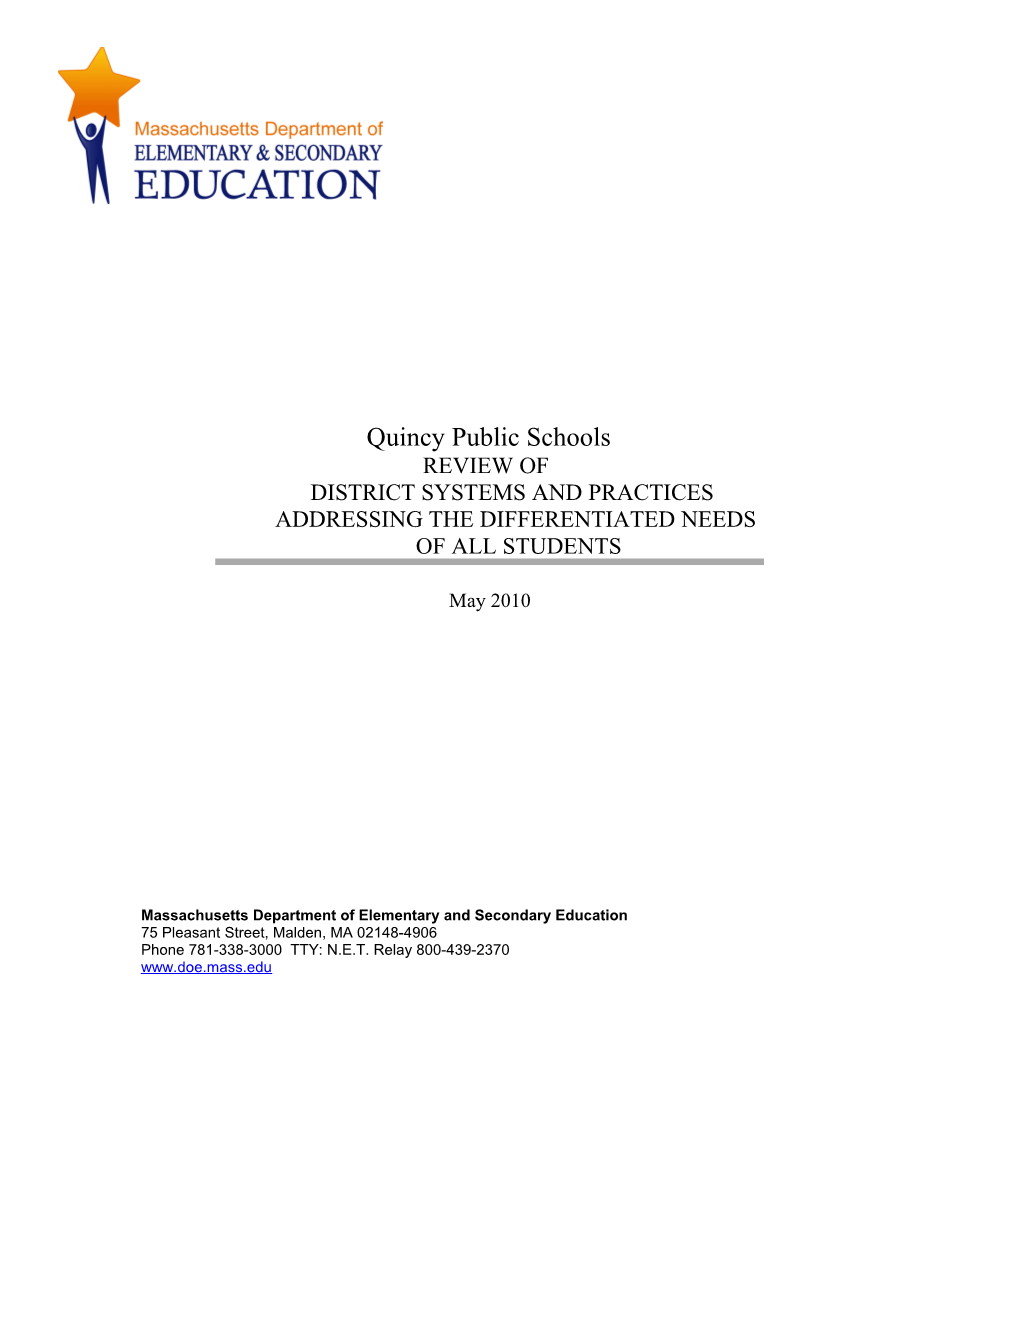 Quincy Public Schools Differentiated Needs Review Report, May 2010